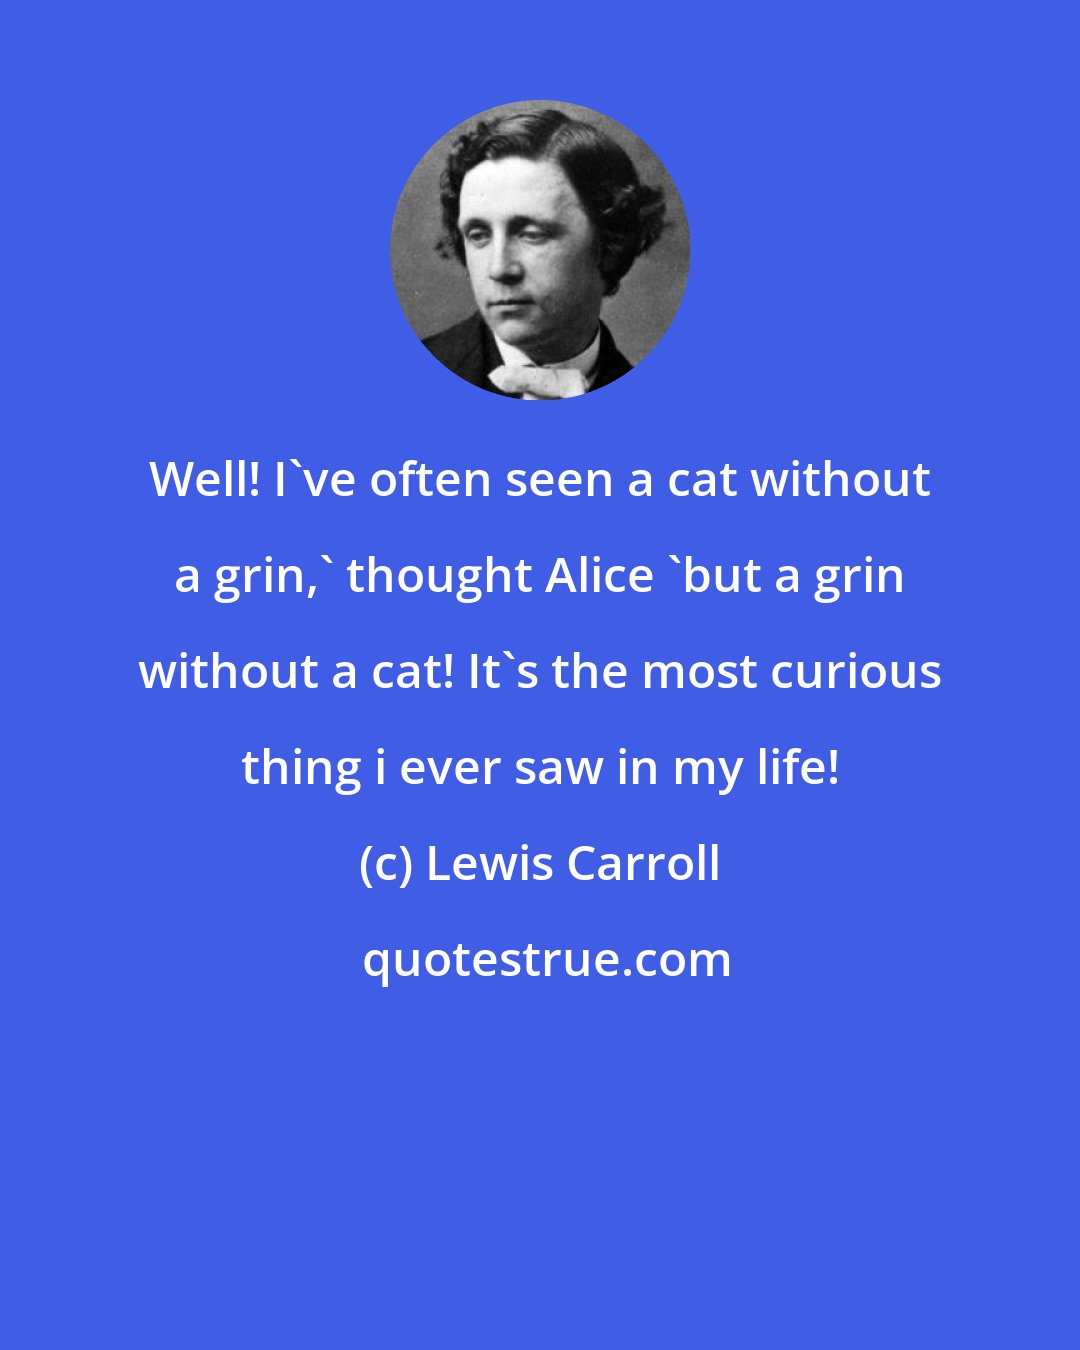 Lewis Carroll: Well! I've often seen a cat without a grin,' thought Alice 'but a grin without a cat! It's the most curious thing i ever saw in my life!